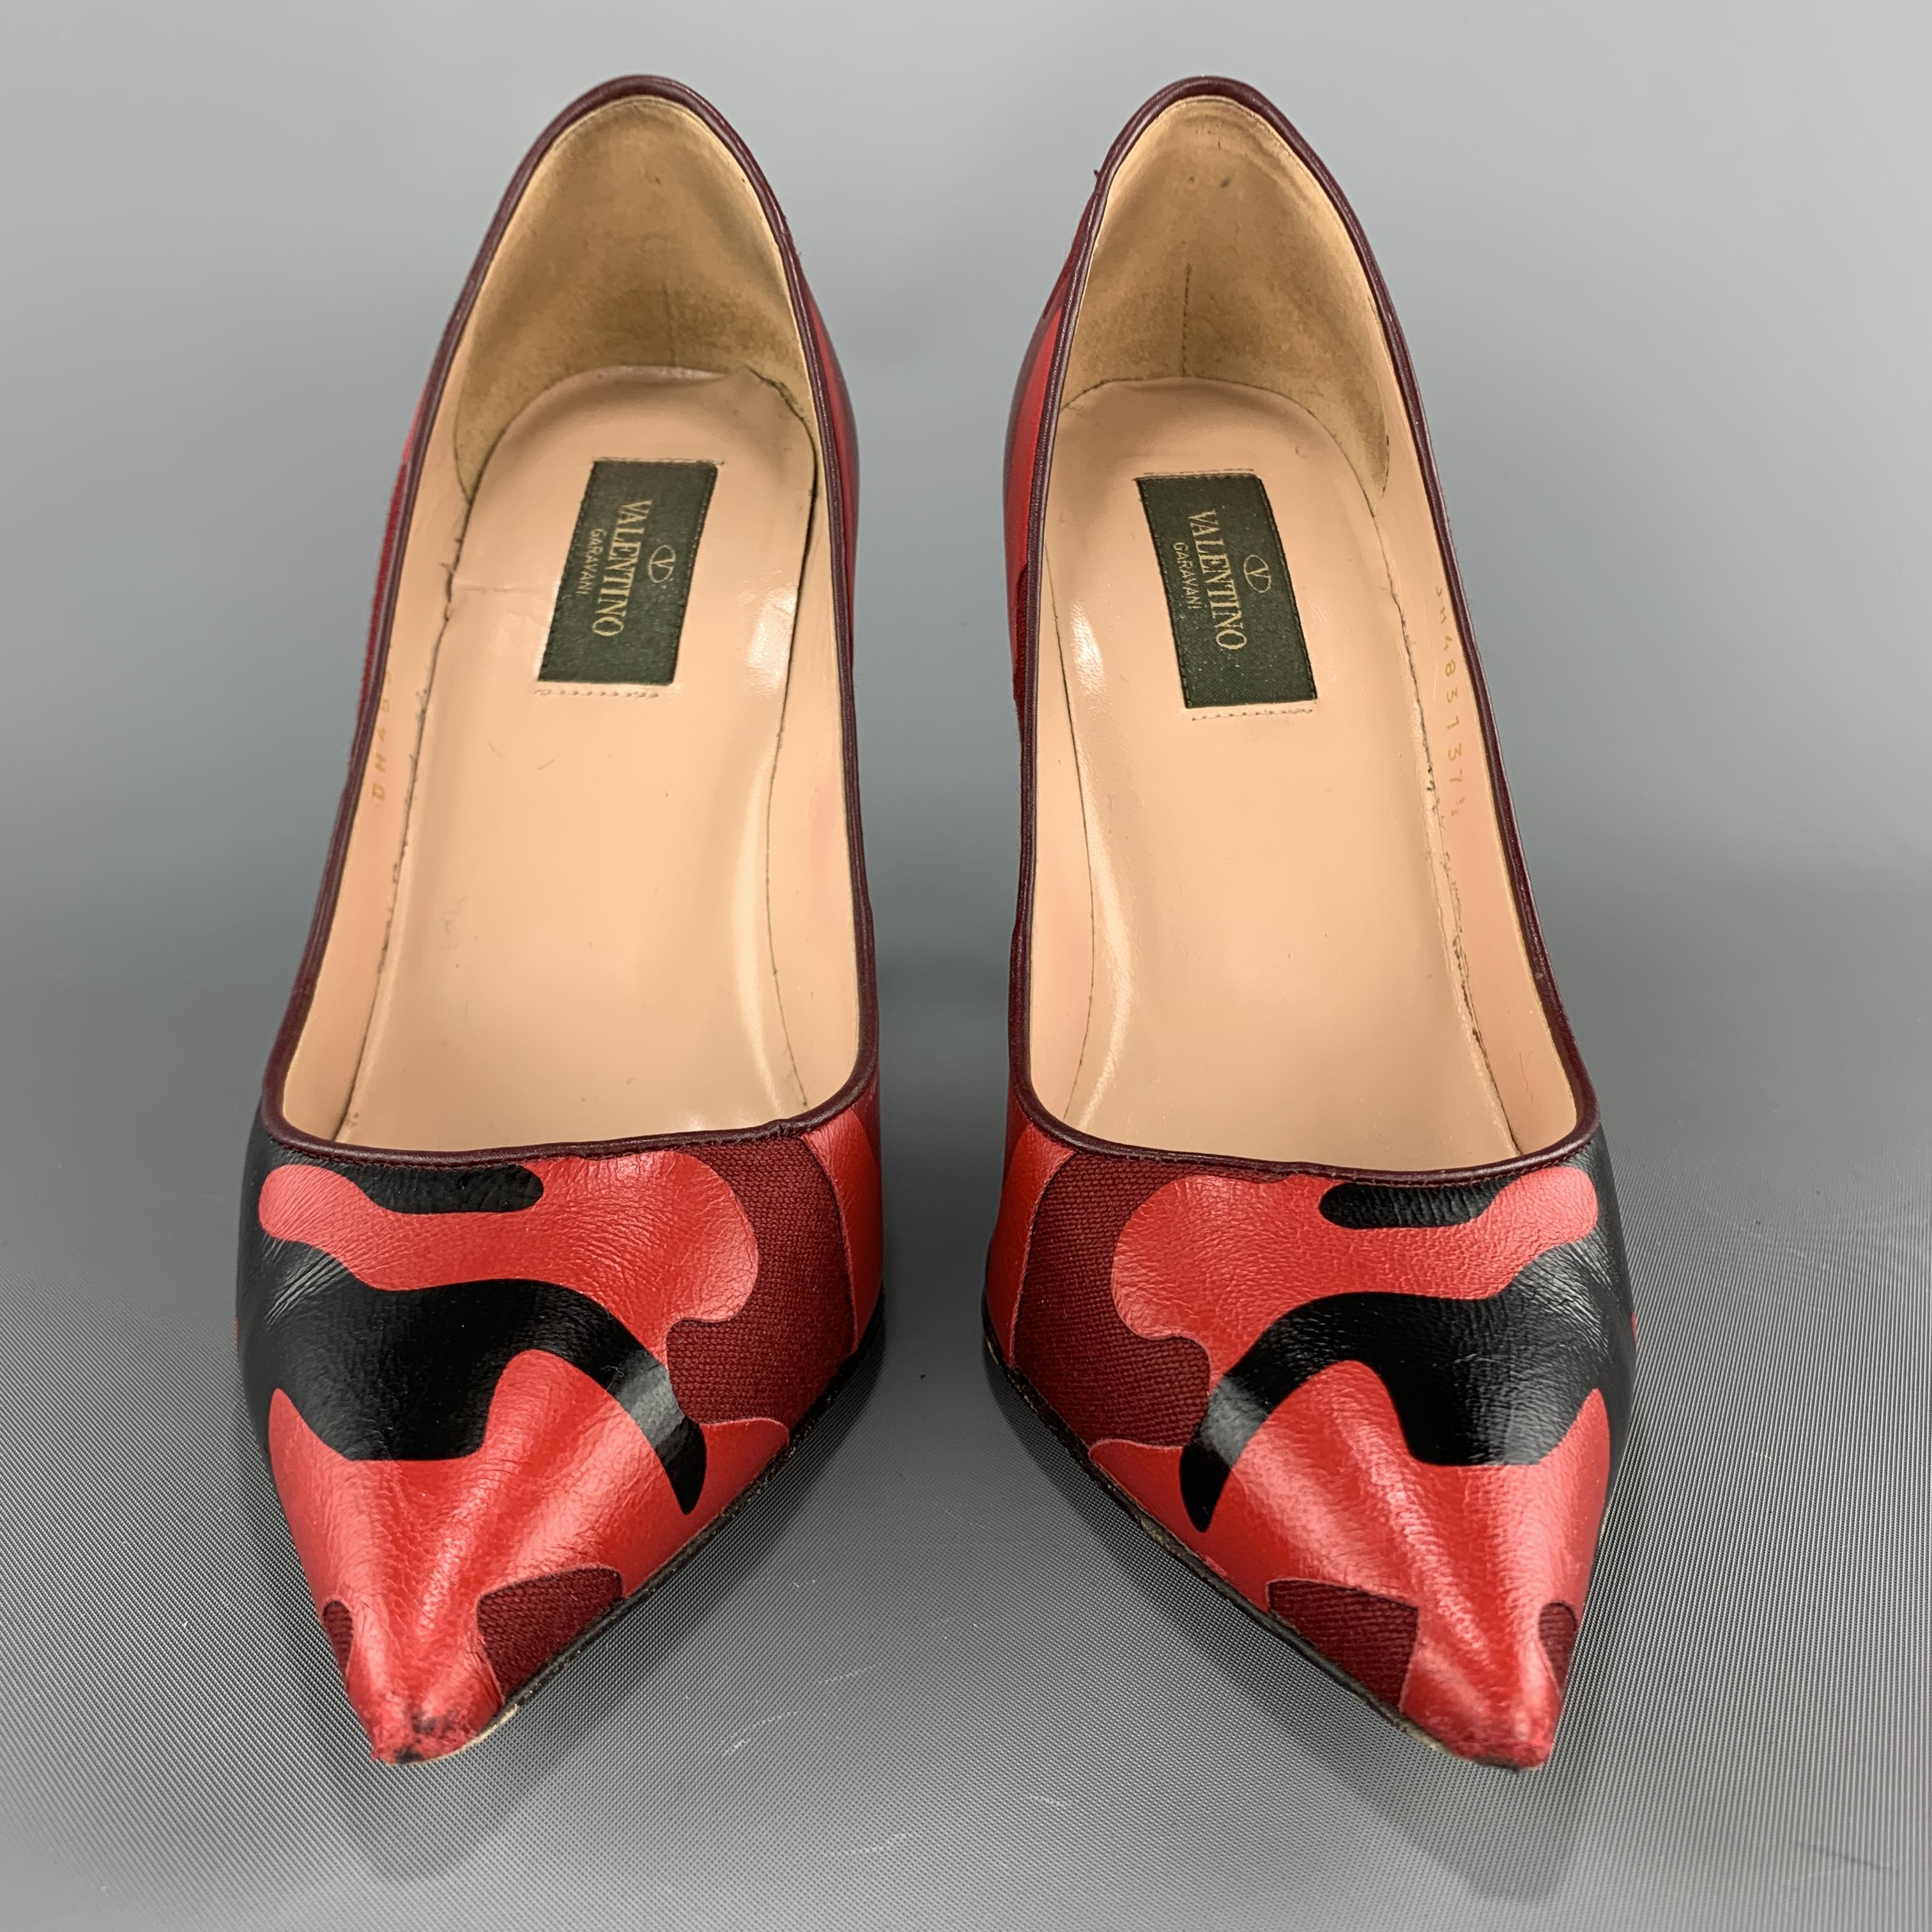 VALENTINO pumps come in red camouflage print leather and canvas with a pointed toe and rockstud heel detail. Made in Italy. 

Very Good Pre-Owned Condition.
Marked: IT 33.5

Heel: 4 in.